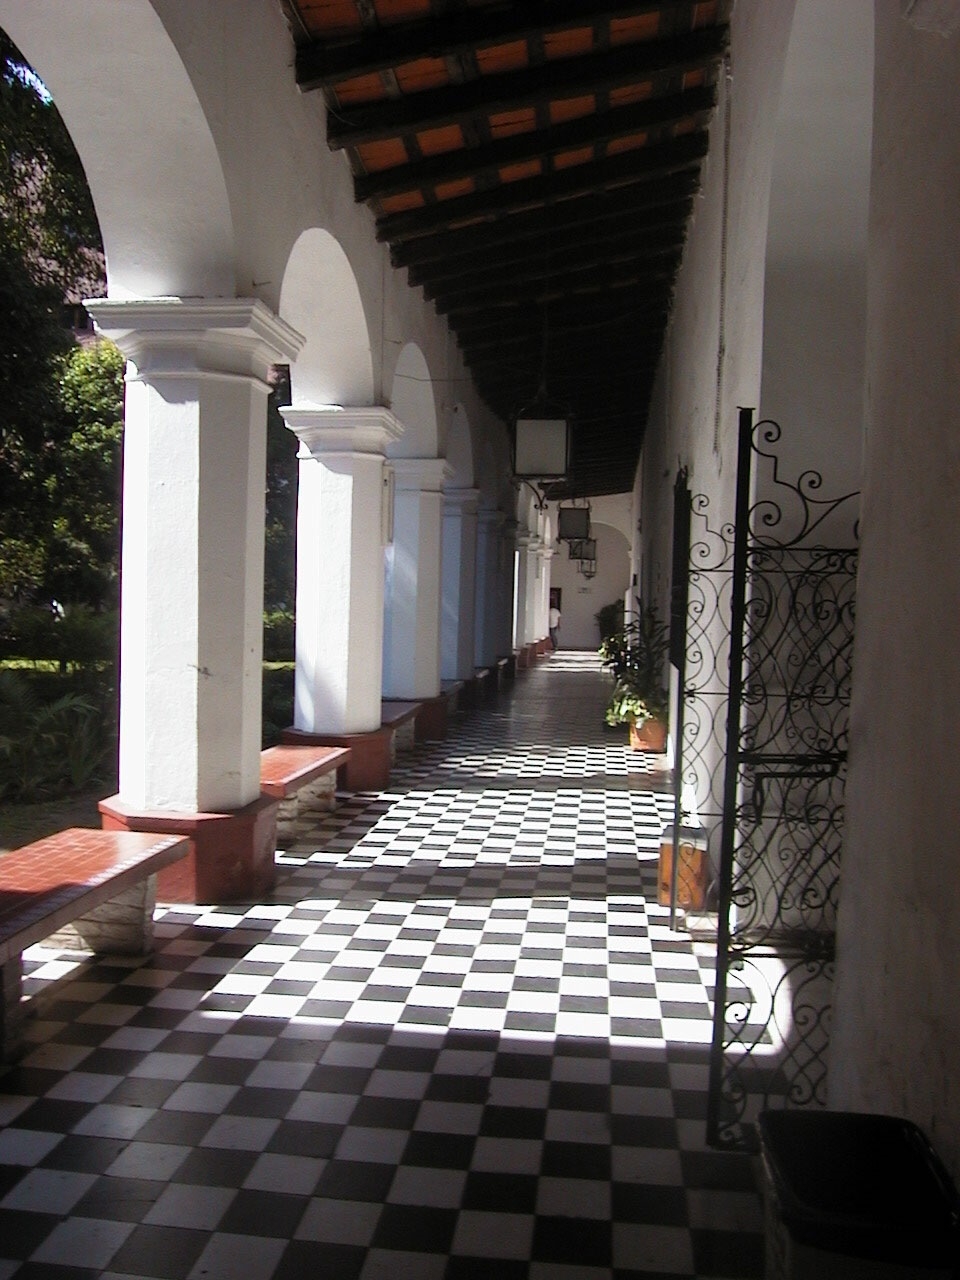 An outdoor corridor with archways